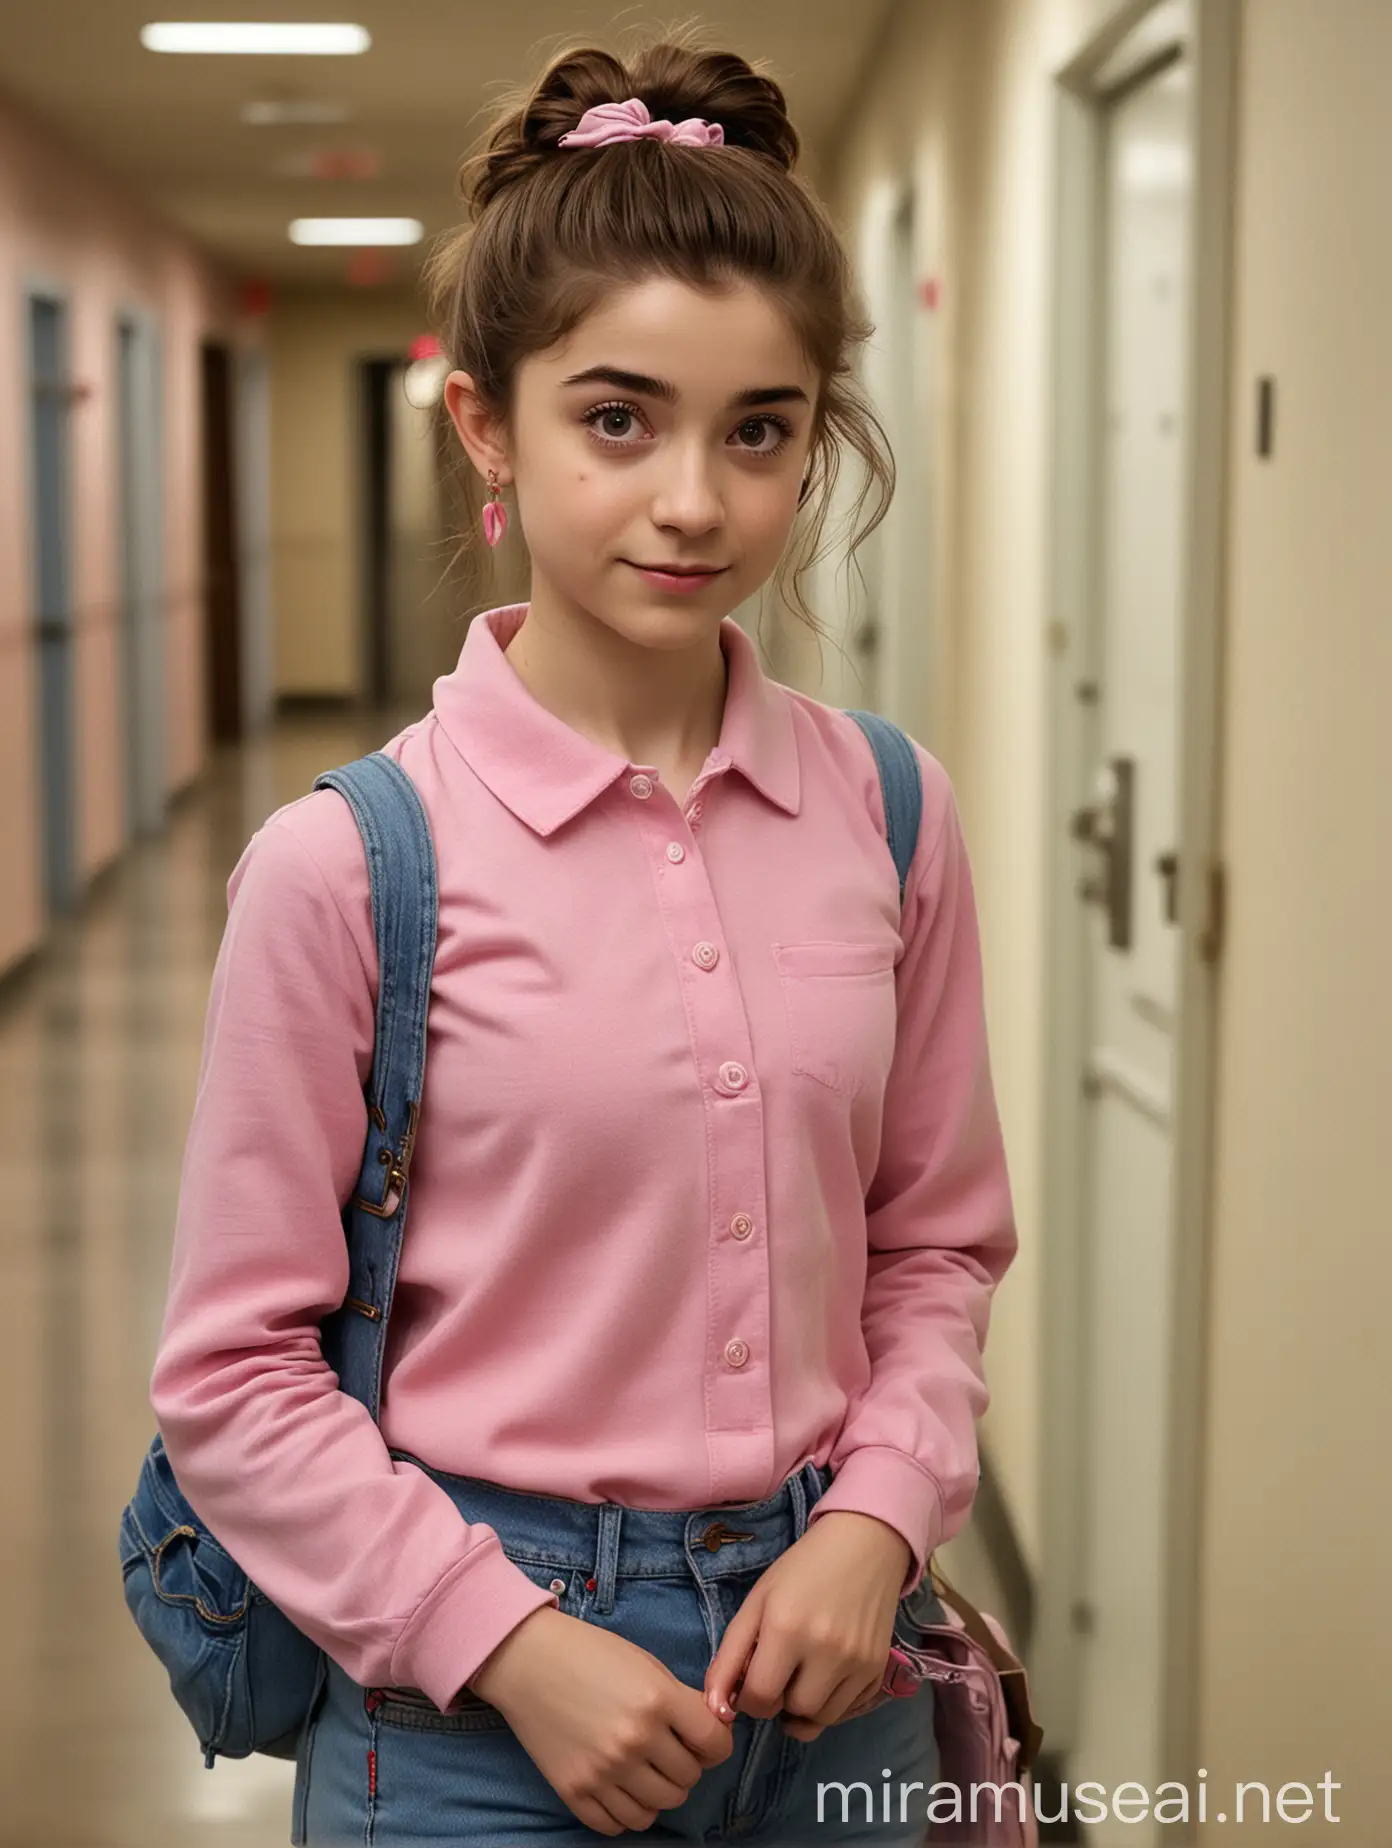 Object: Natalia Dyer with dark‐brown hair and eyes. Her usual hairstyle is a ponytail with a pink scrunchie. Her mauve‐and‐white‐colored polo and blue jeans suit her gentle and discreet temperament. She wears pink earrings and often carries textbooks in her hands.  Background: University hallway.